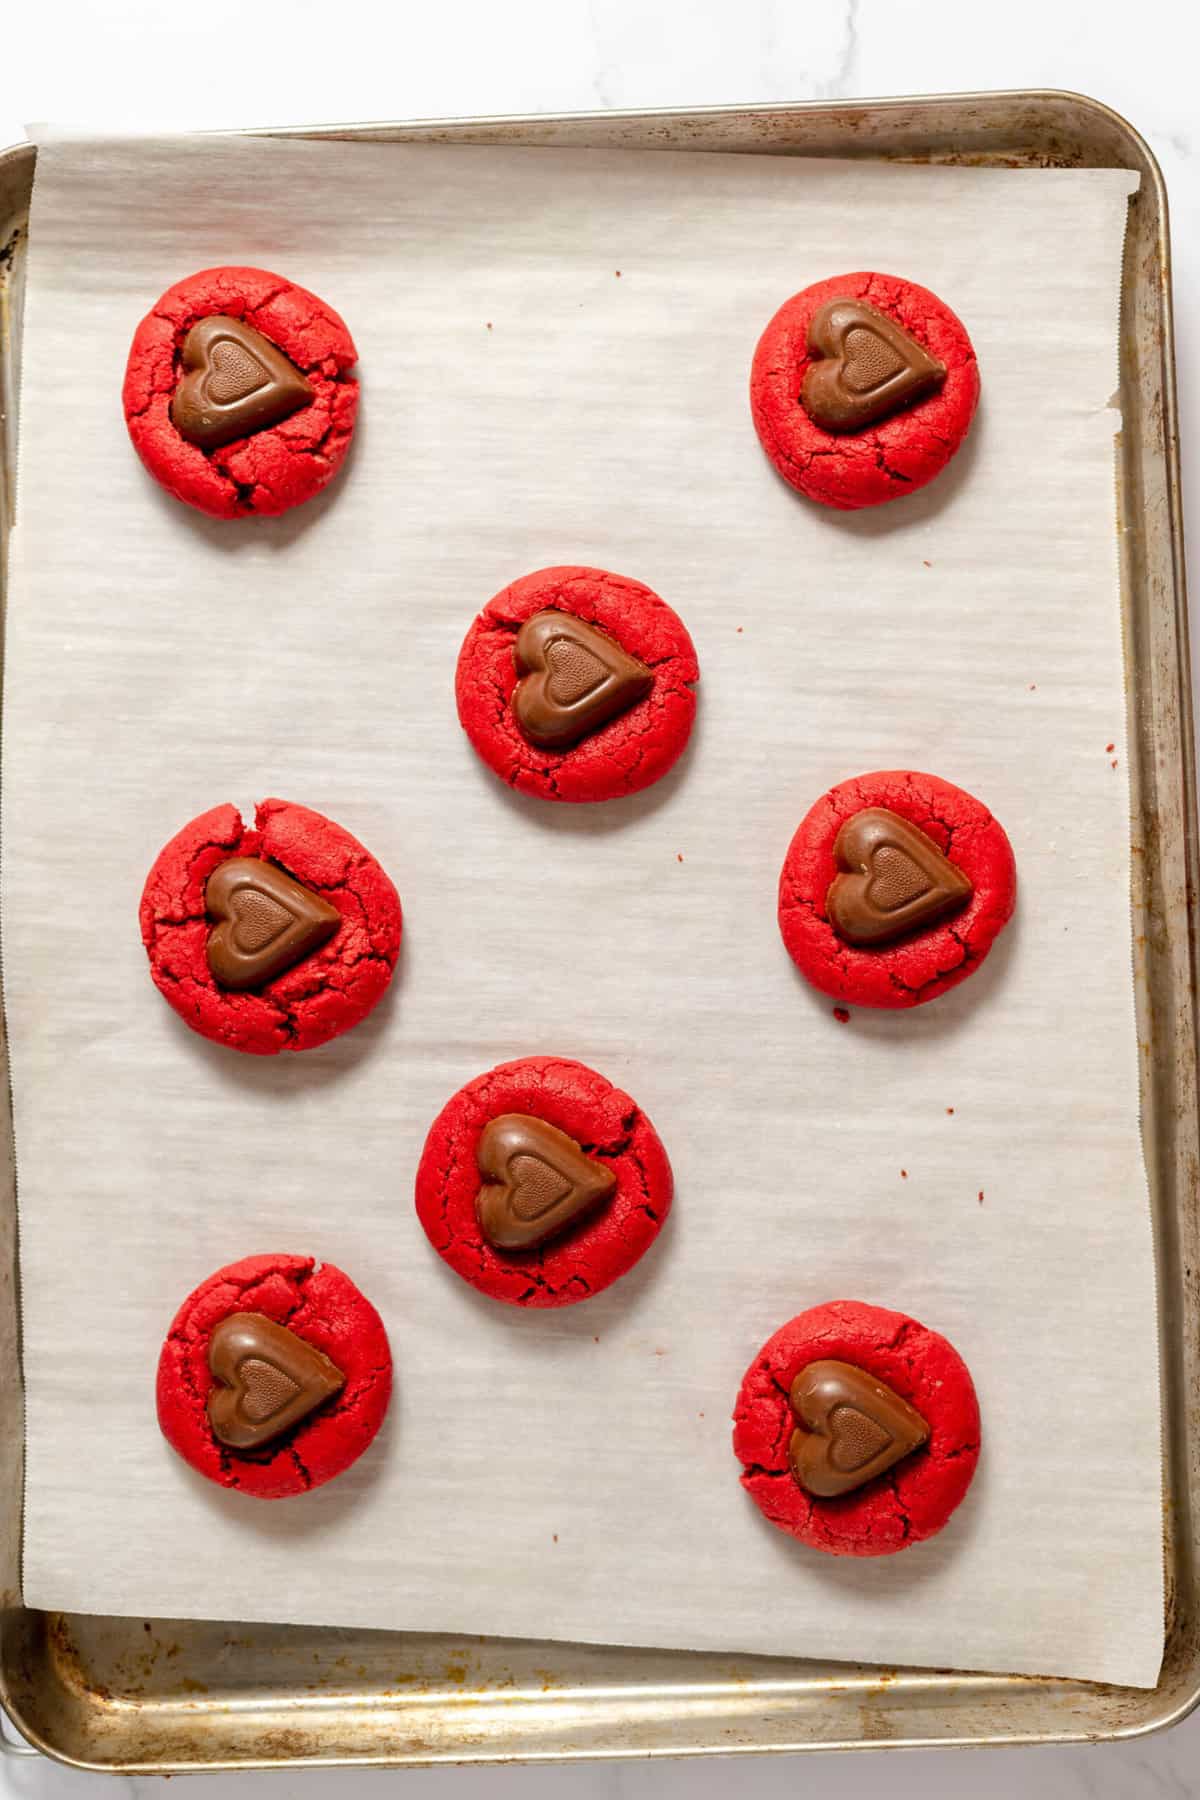 Adding unwrapped dove chocolate hearts on top of soft red velvet cookies on a baking sheet lined with parchment paper.